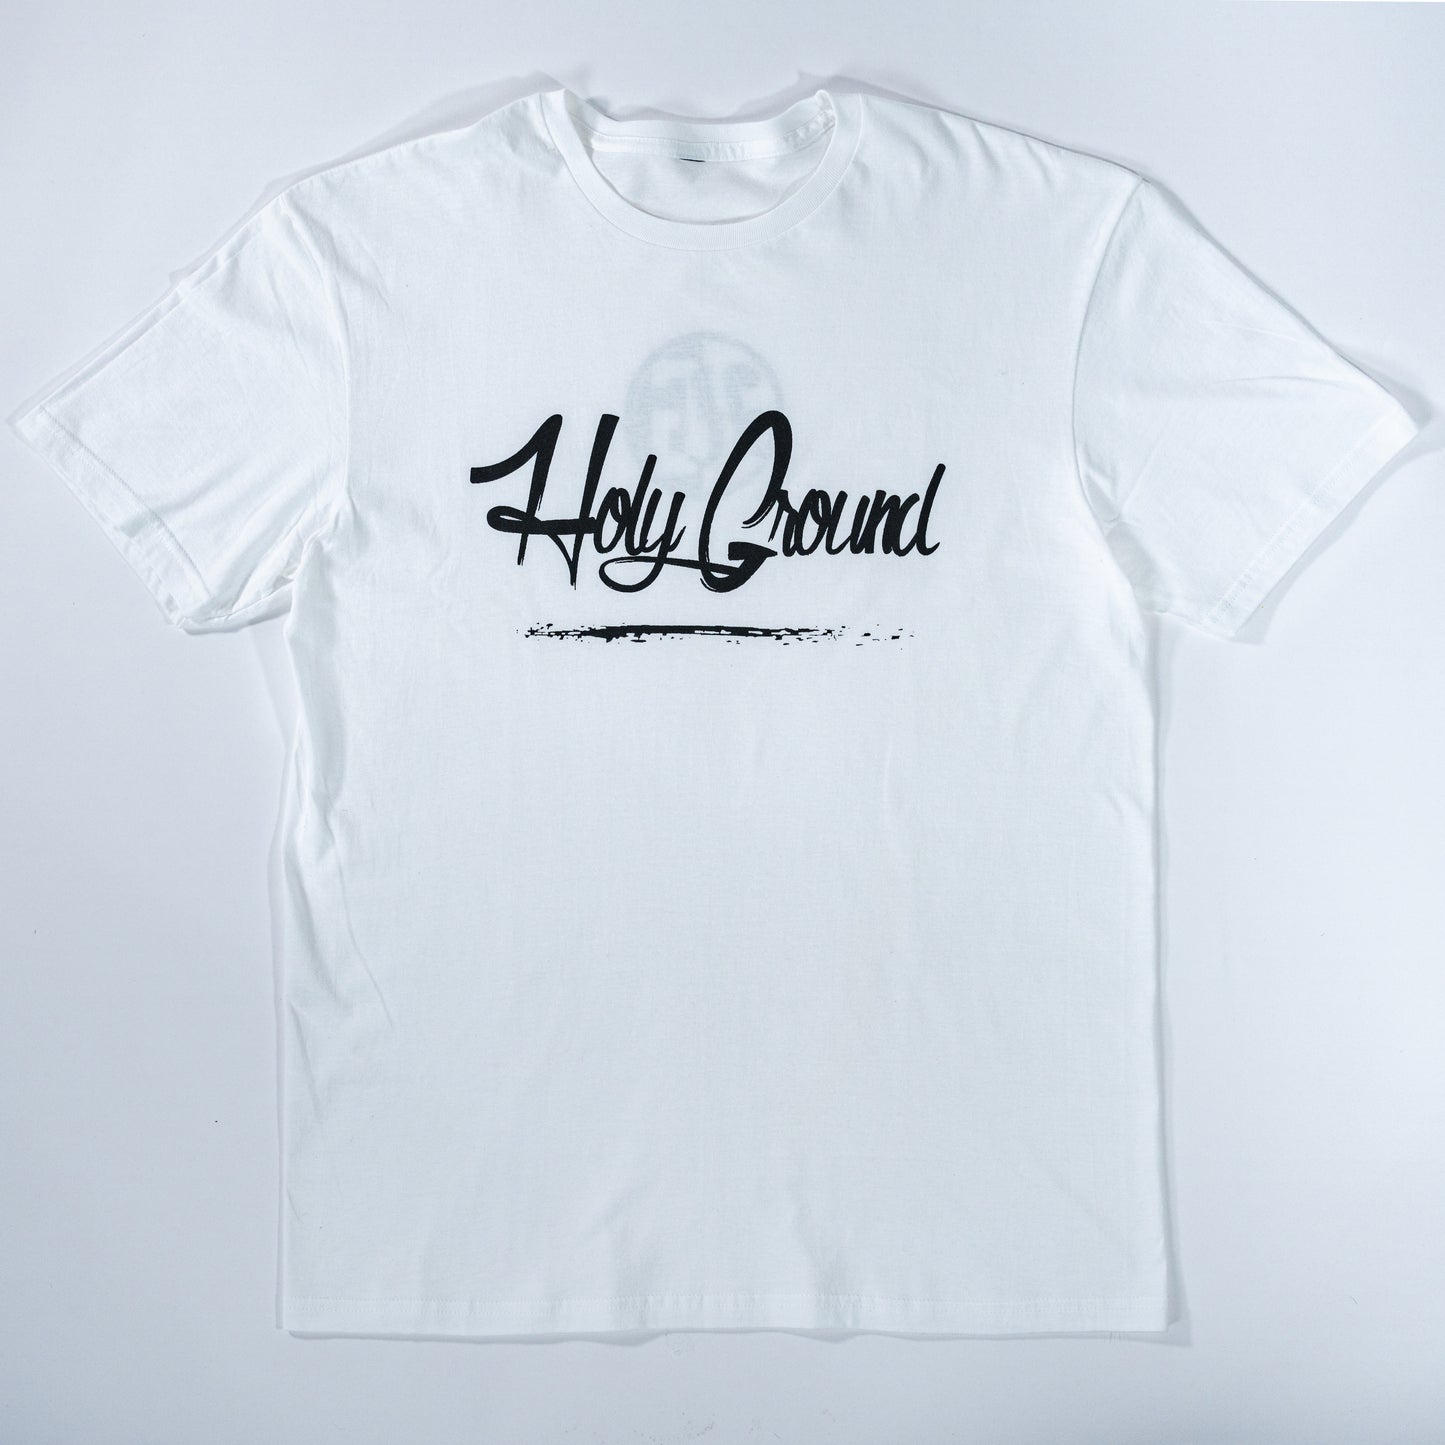 White short sleeve T-shirt with black lettering